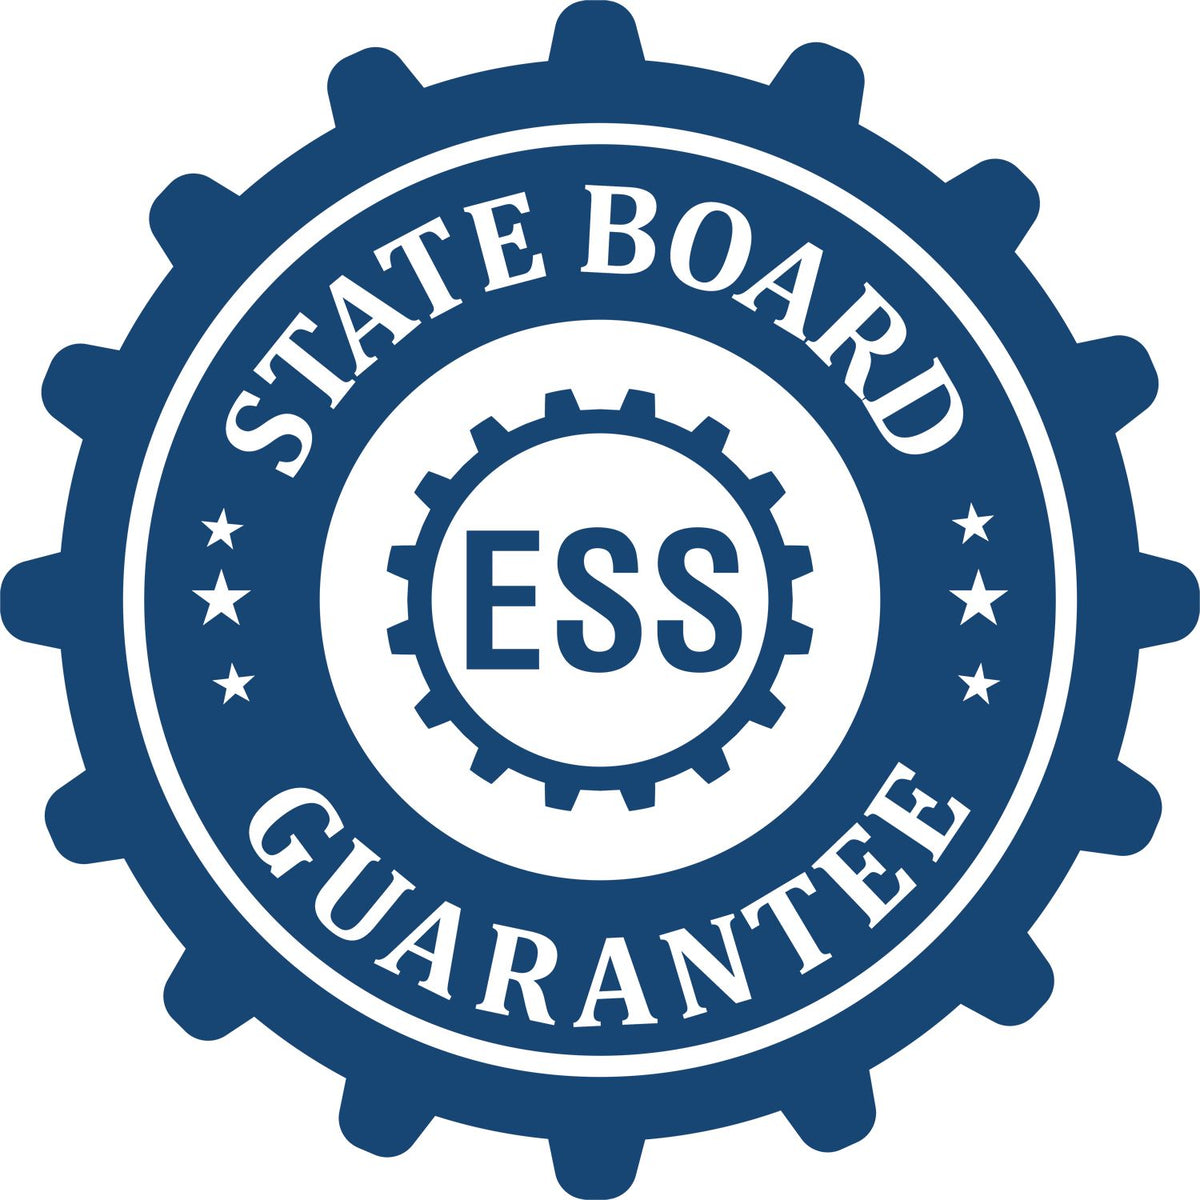 An emblem in a gear shape illustrating a state board guarantee for the State of Alaska Long Reach Architectural Embossing Seal product.